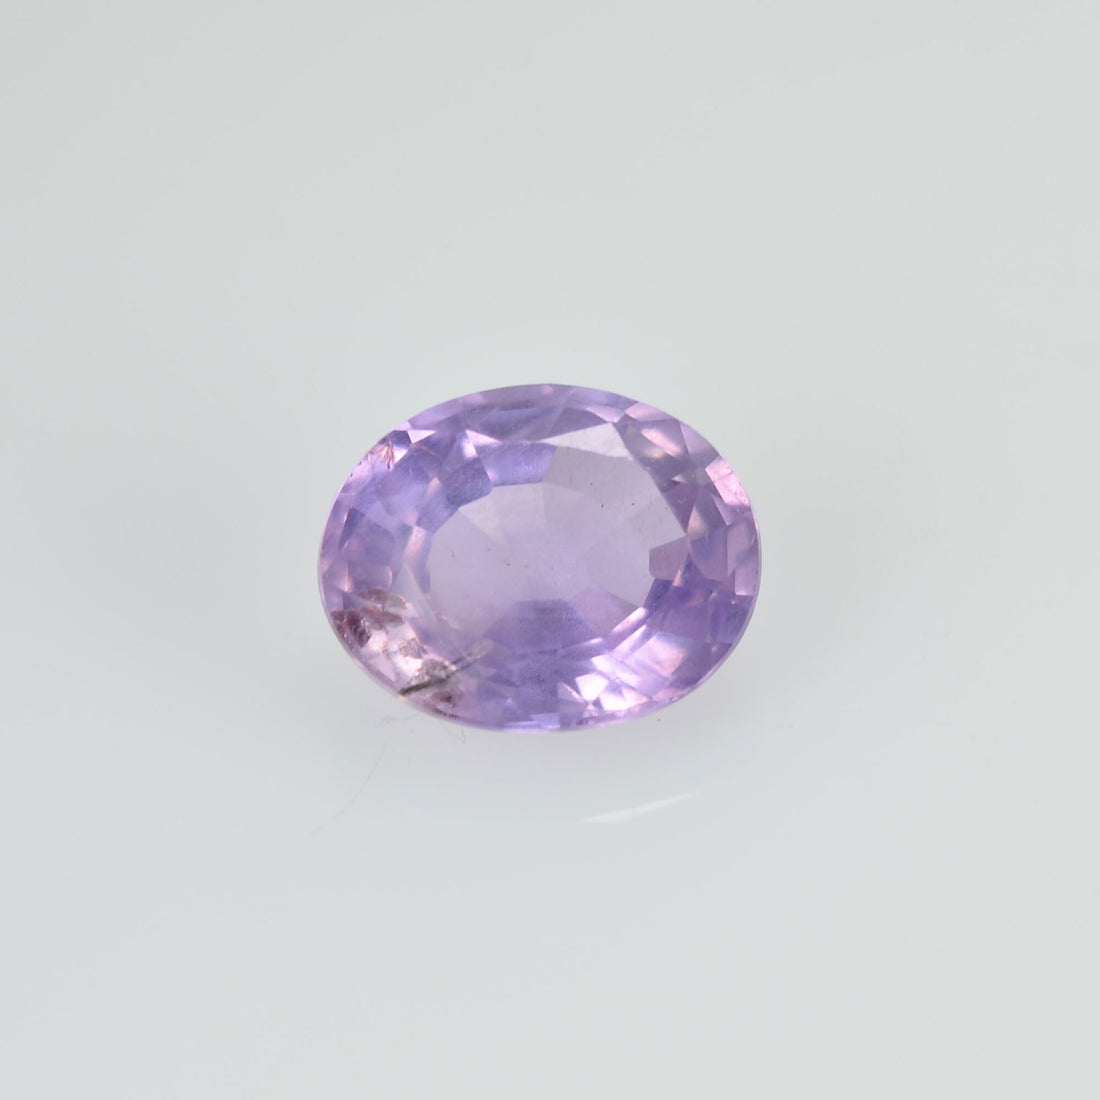 0.55 cts Natural Lavender Sapphire Loose Gemstone Oval Cut